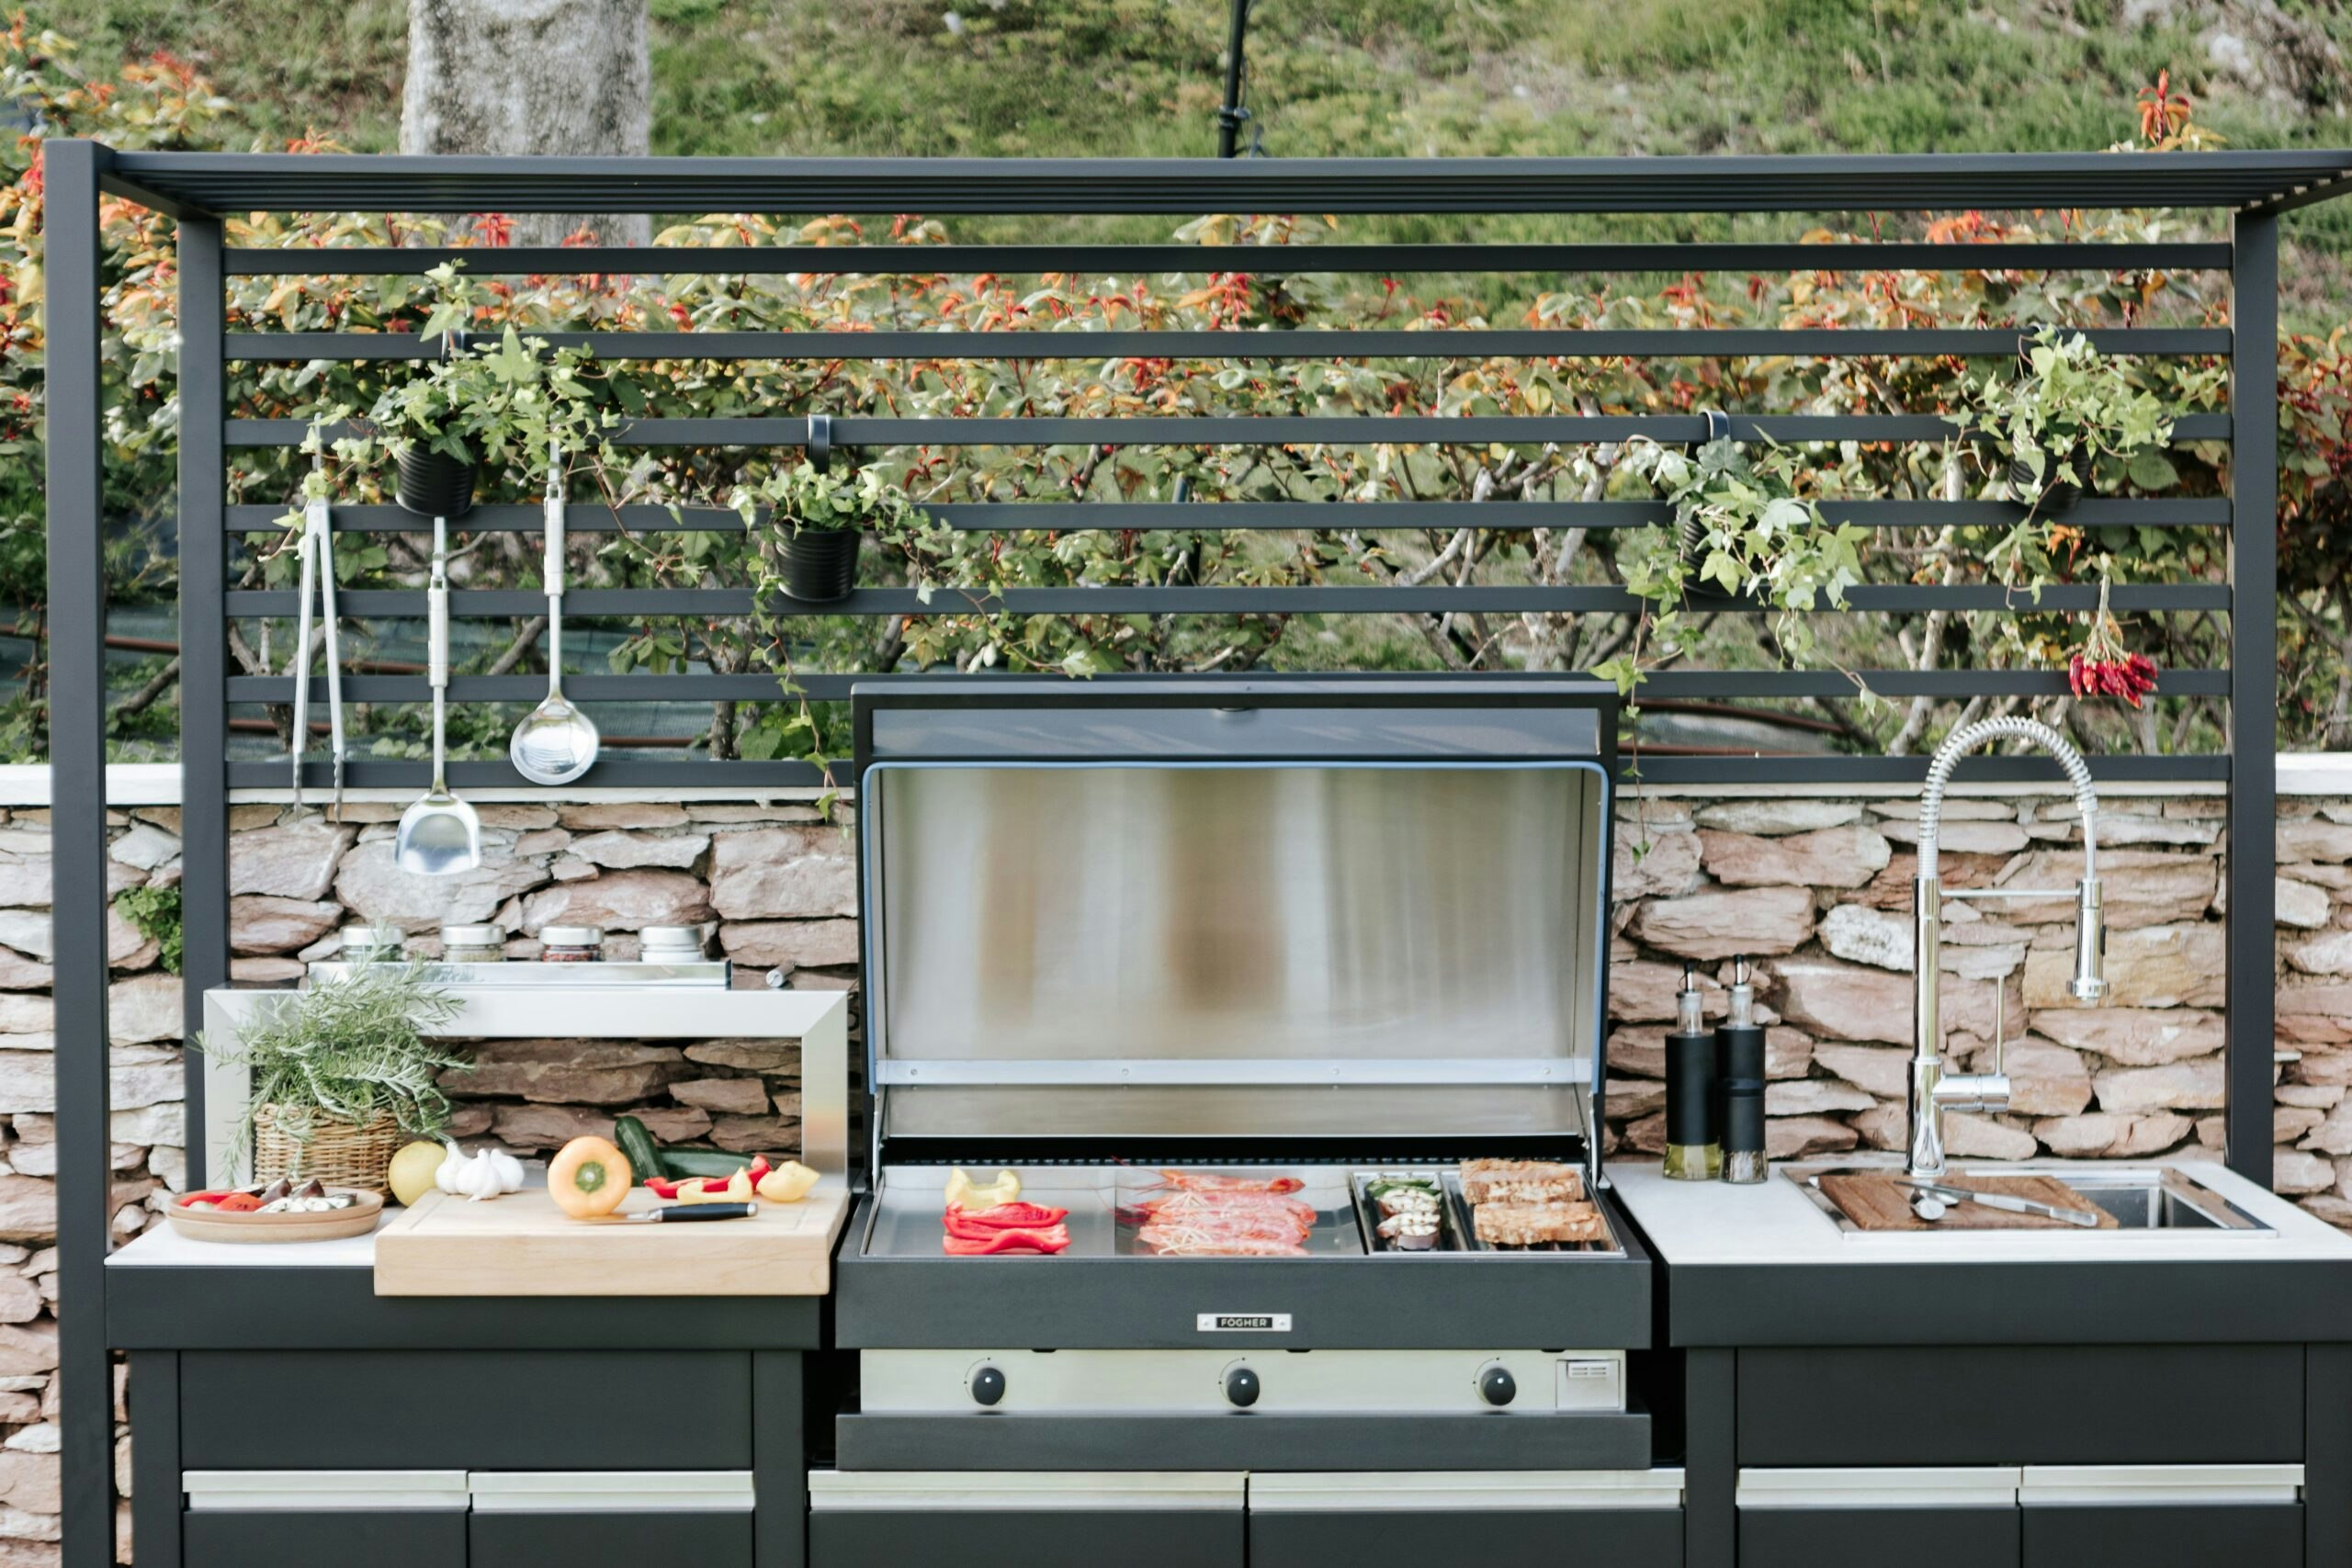 An expansive outdoor kitchen set against a picturesque backdrop. The kitchen area is furnished with modern appliances including a grill, sink, and countertop. The space is adorned by a pergola. Lush greenery and sunlight complete the inviting outdoor culinary space.